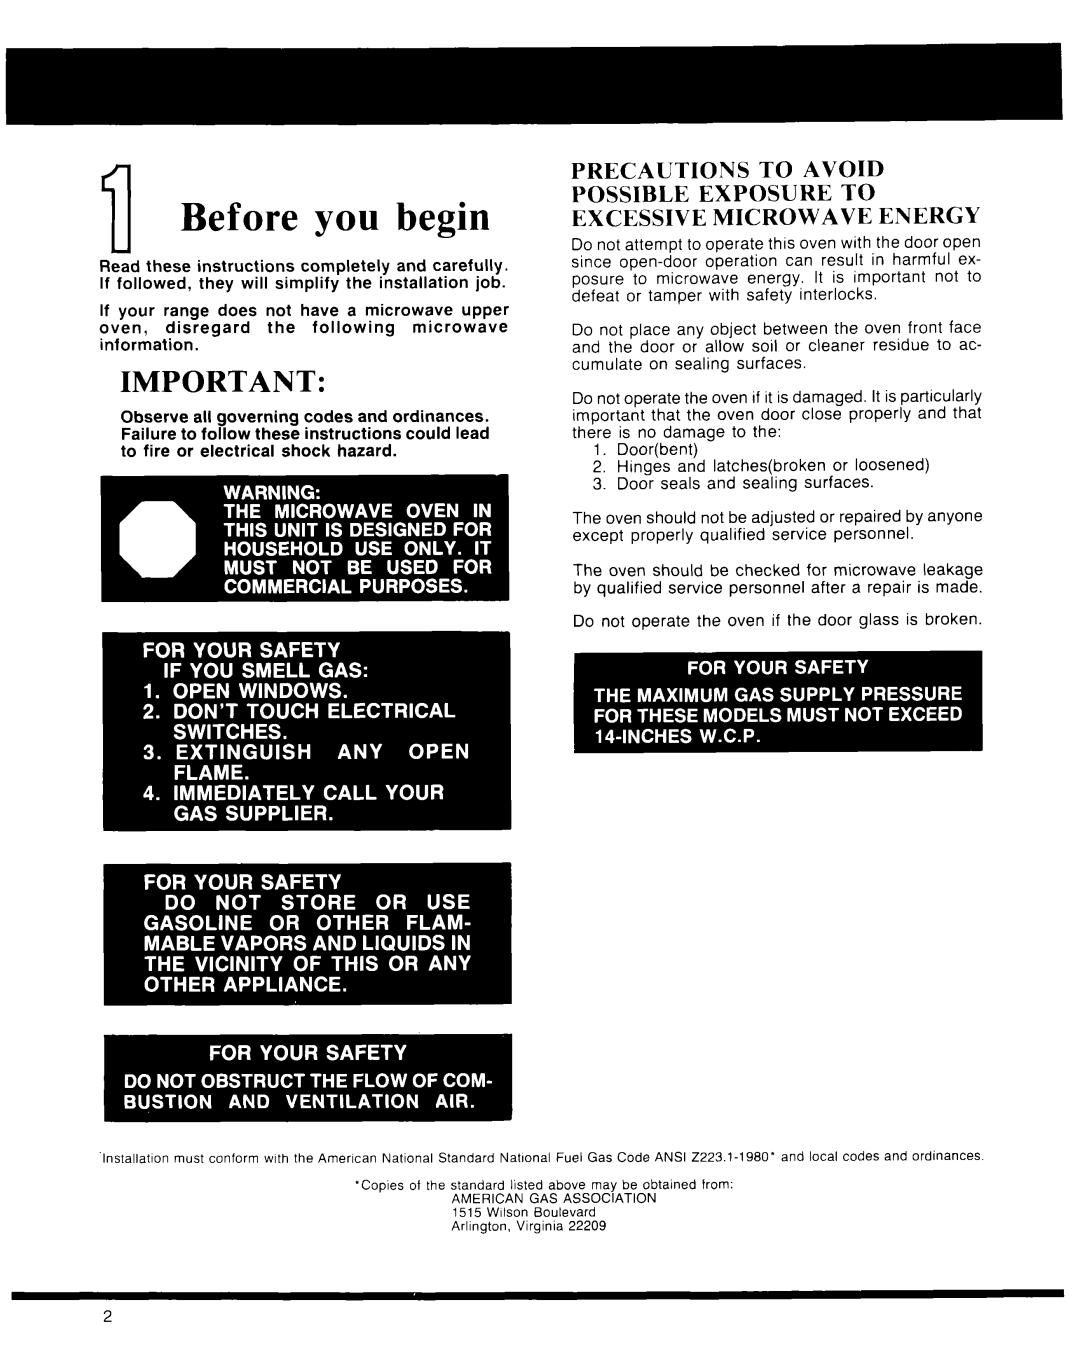 Whirlpool Microwave Oven manual Before you begin, Precautions To Avoid, Possible Exposure To Excessive Microwave Energy 